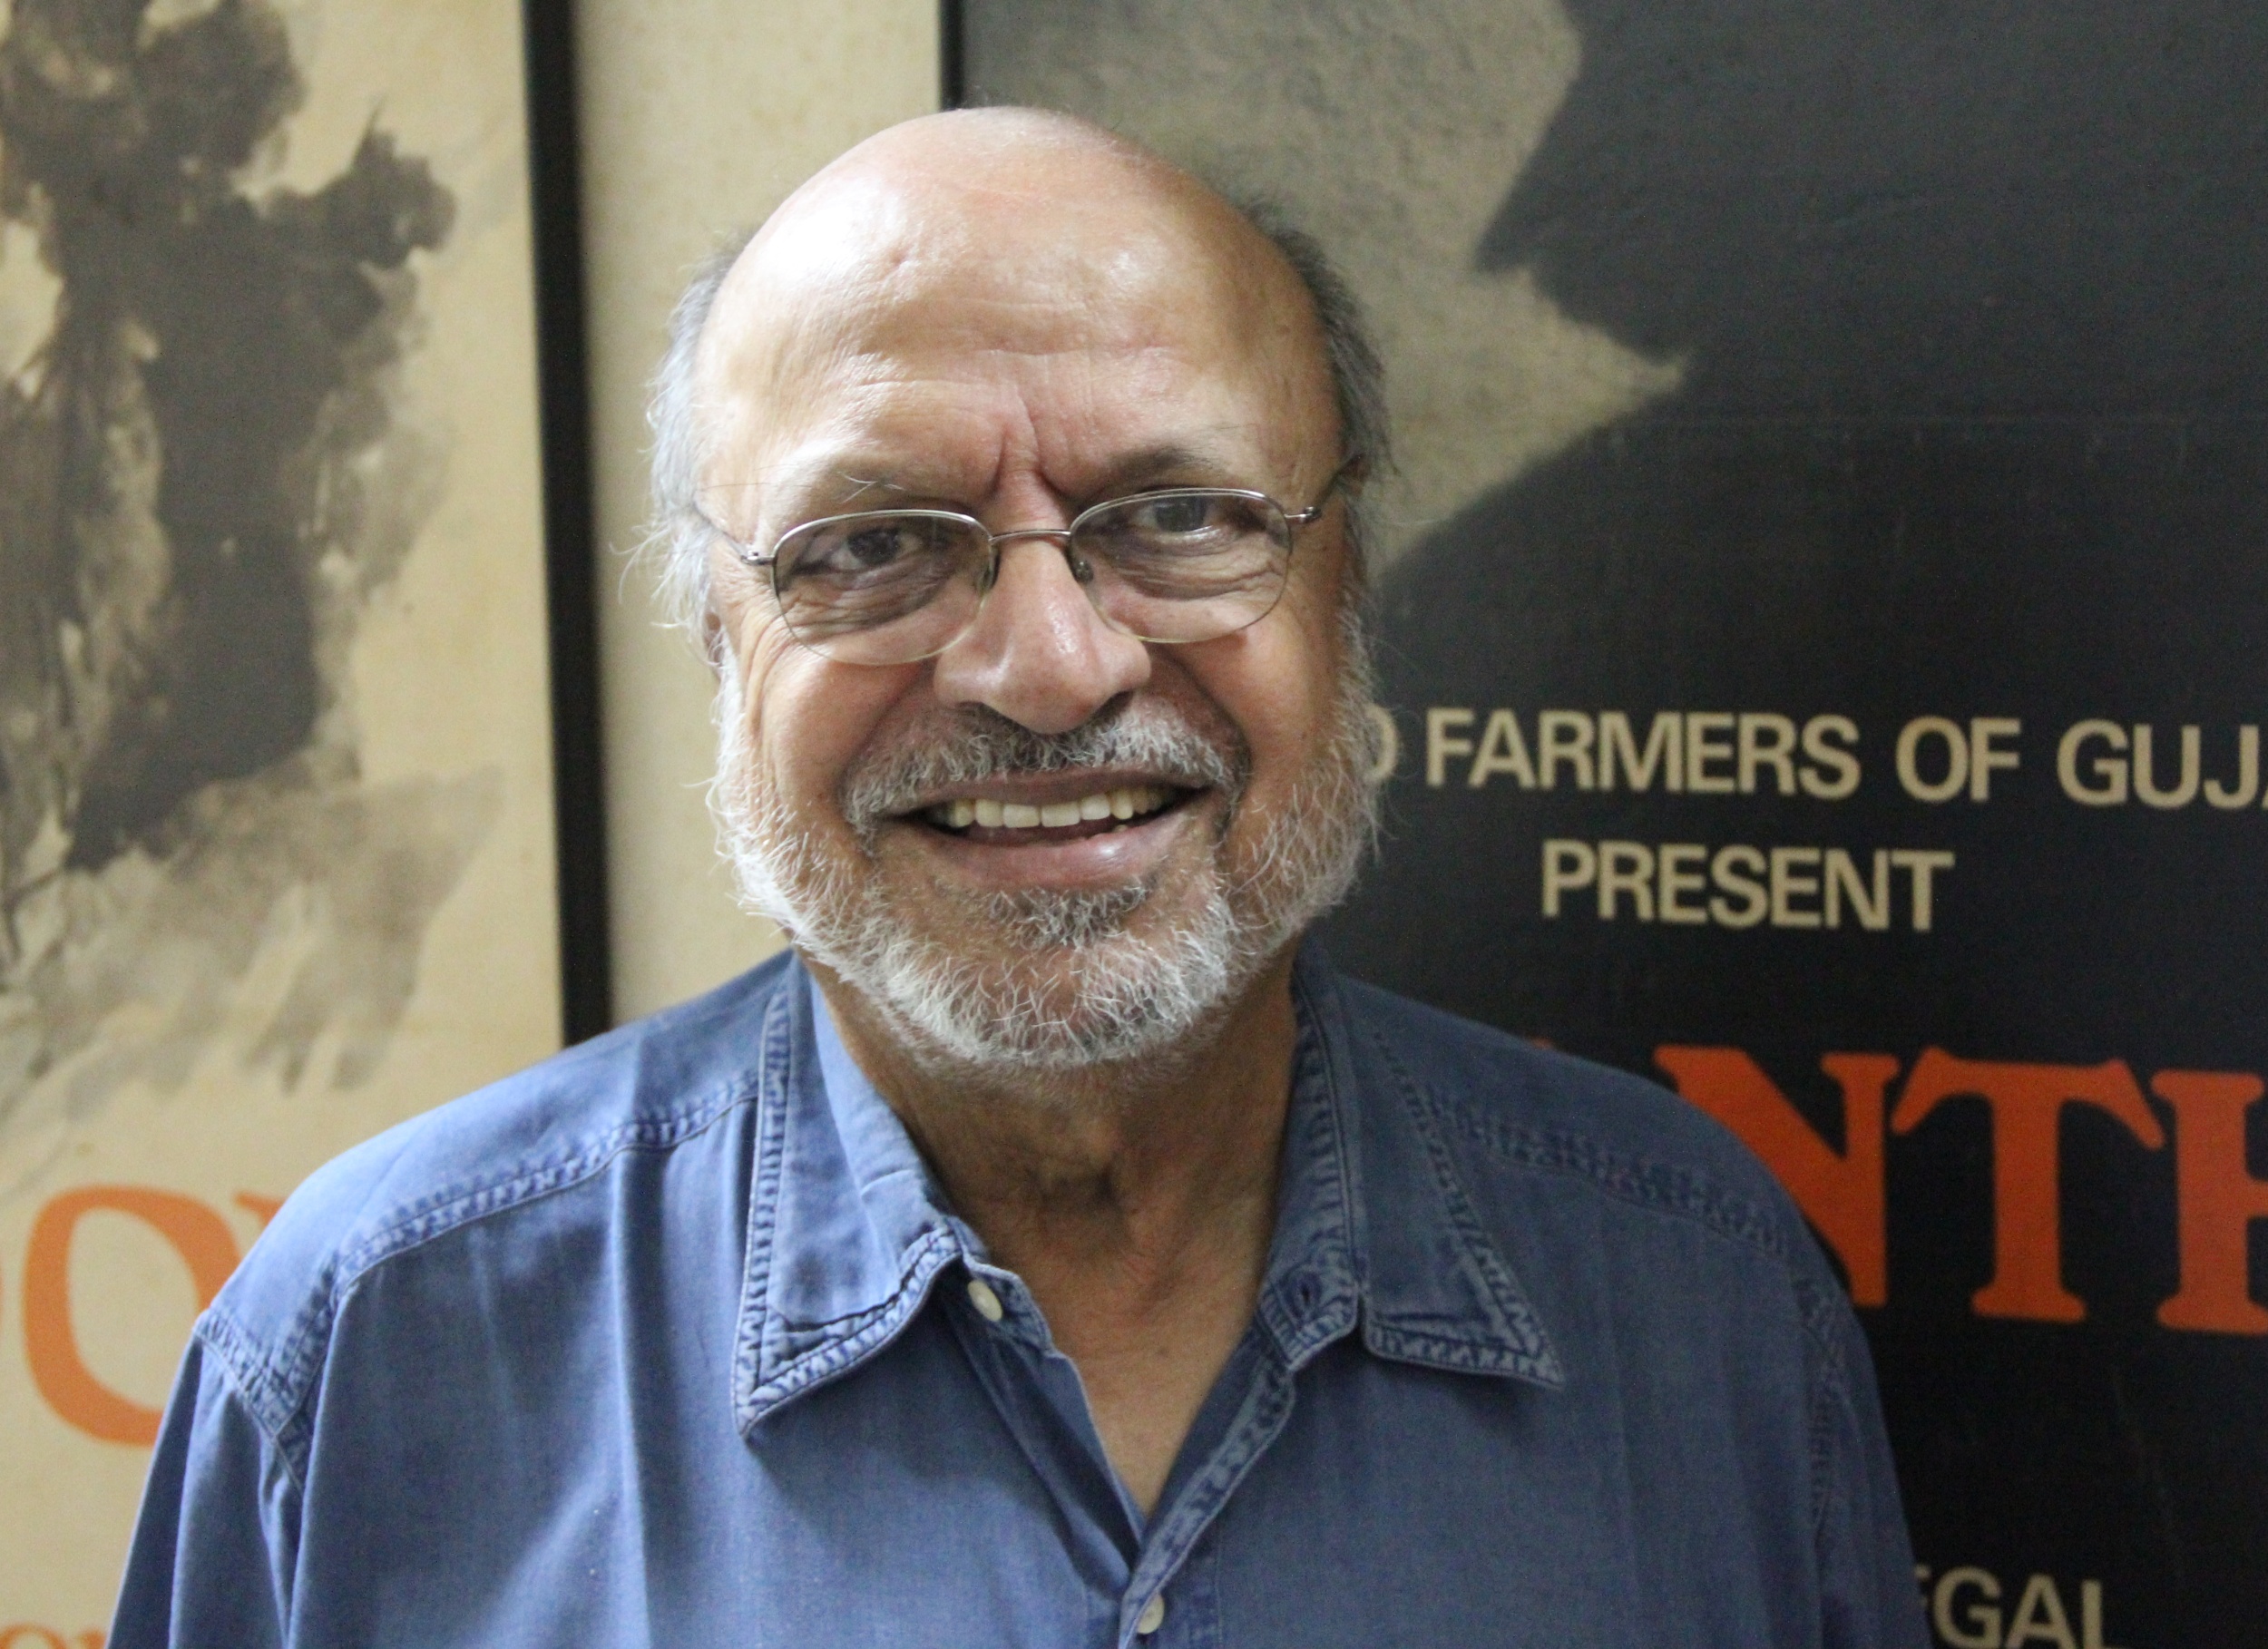 There's been no filmmaker like Satyajit Ray: Benegal